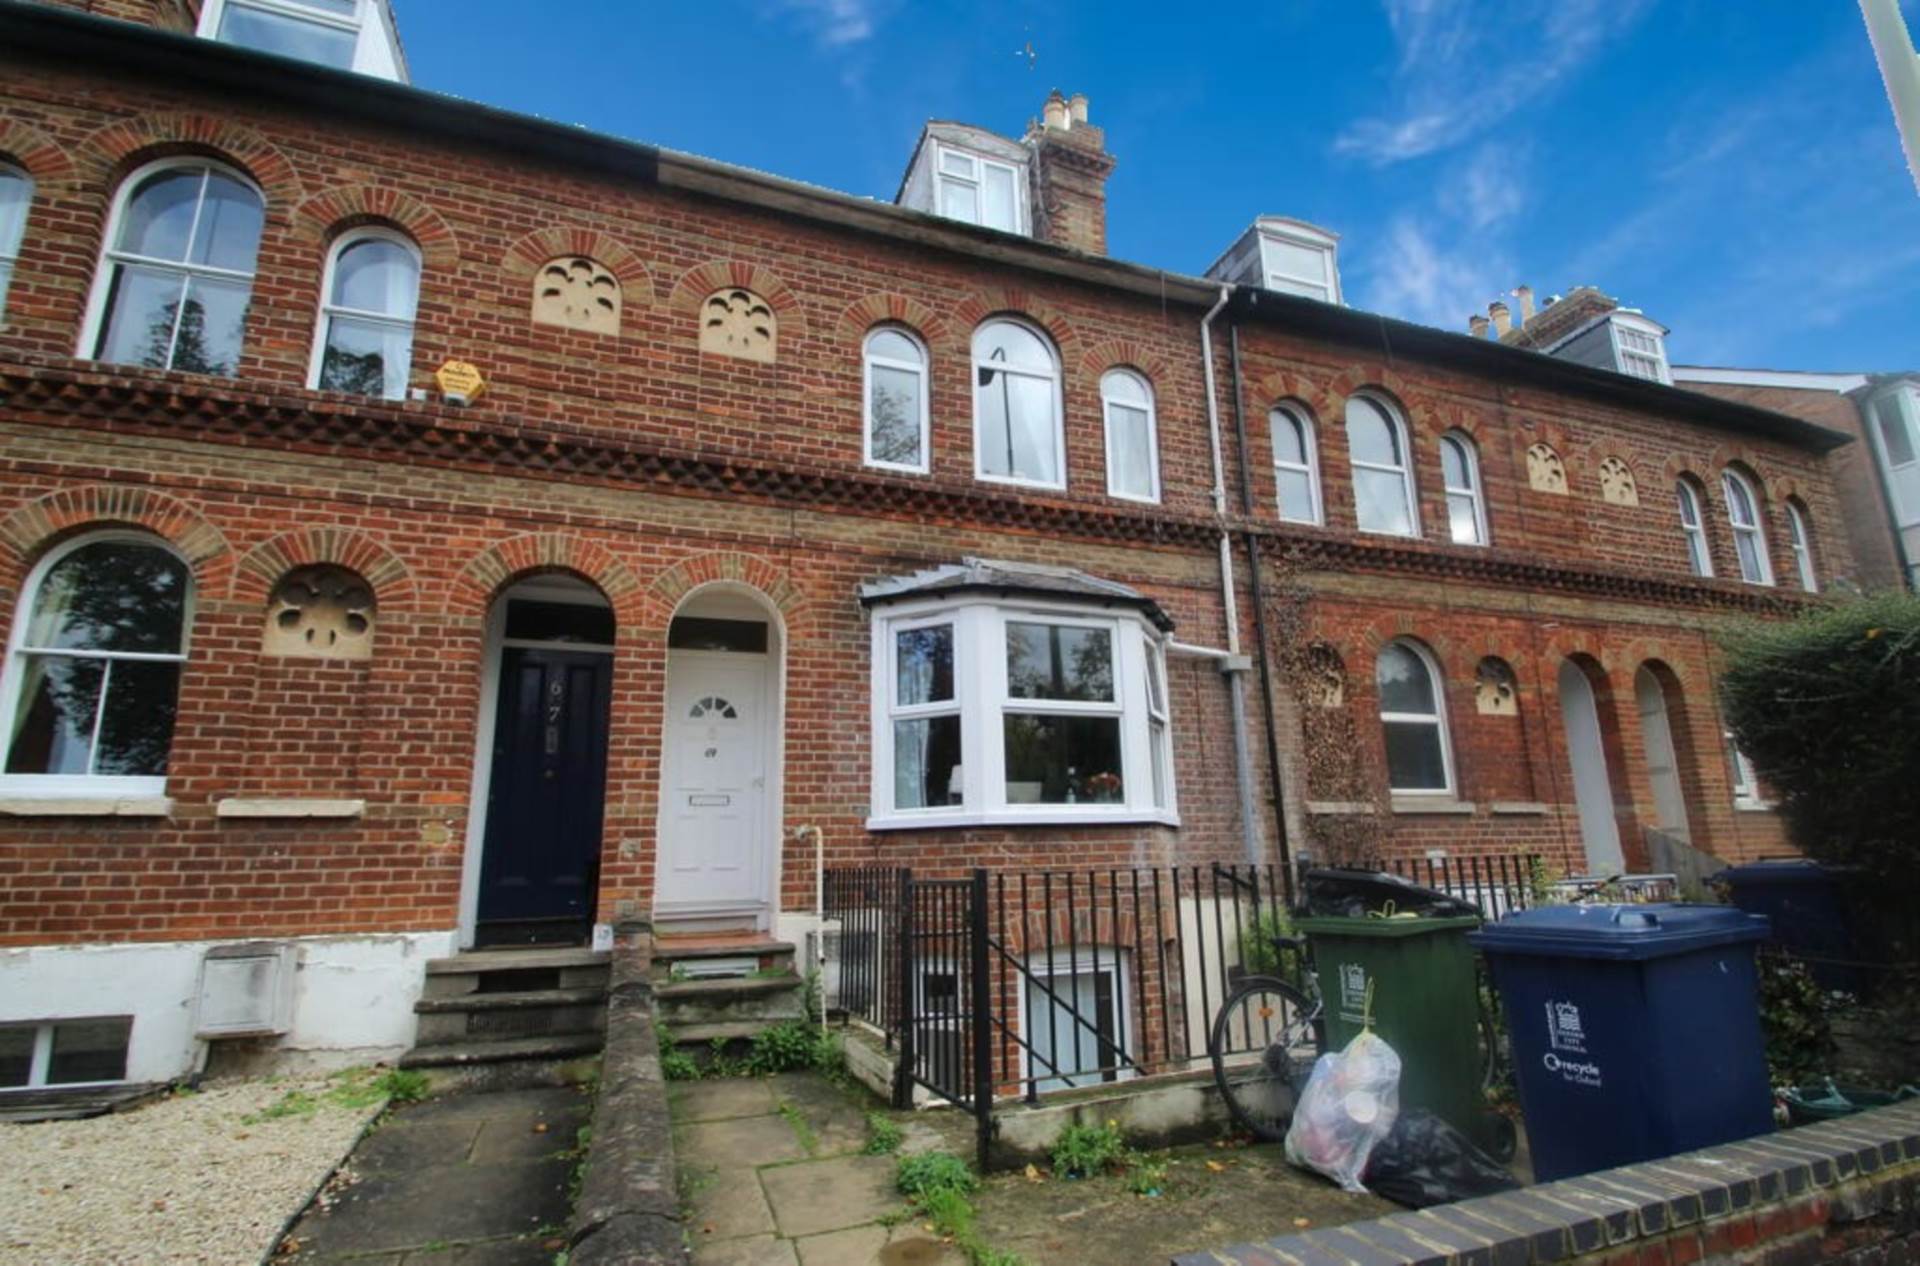 6 bed Semi-Detached House for rent in Oxford. From James C Penny Estate Agents - East Oxford